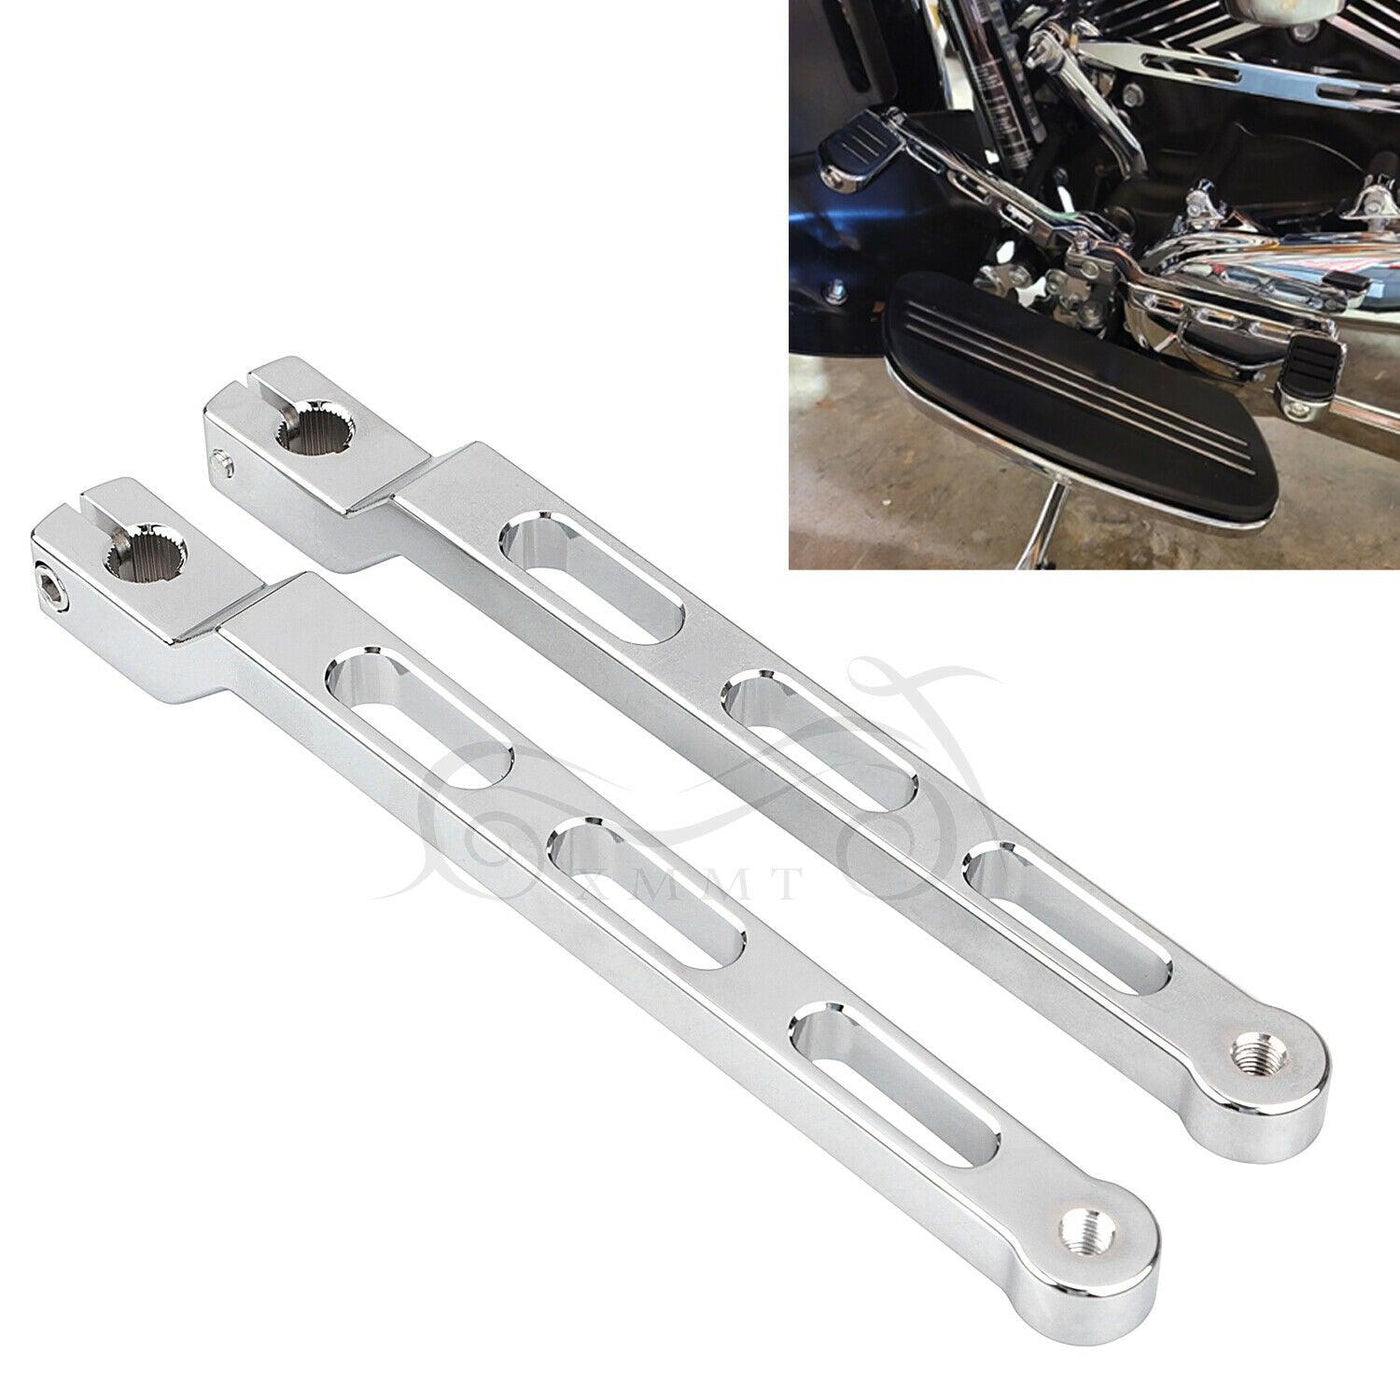 9.84" Extended Shift Levers Chrome Heel Toe Shifter Set For Harley Touring Trike - Moto Life Products